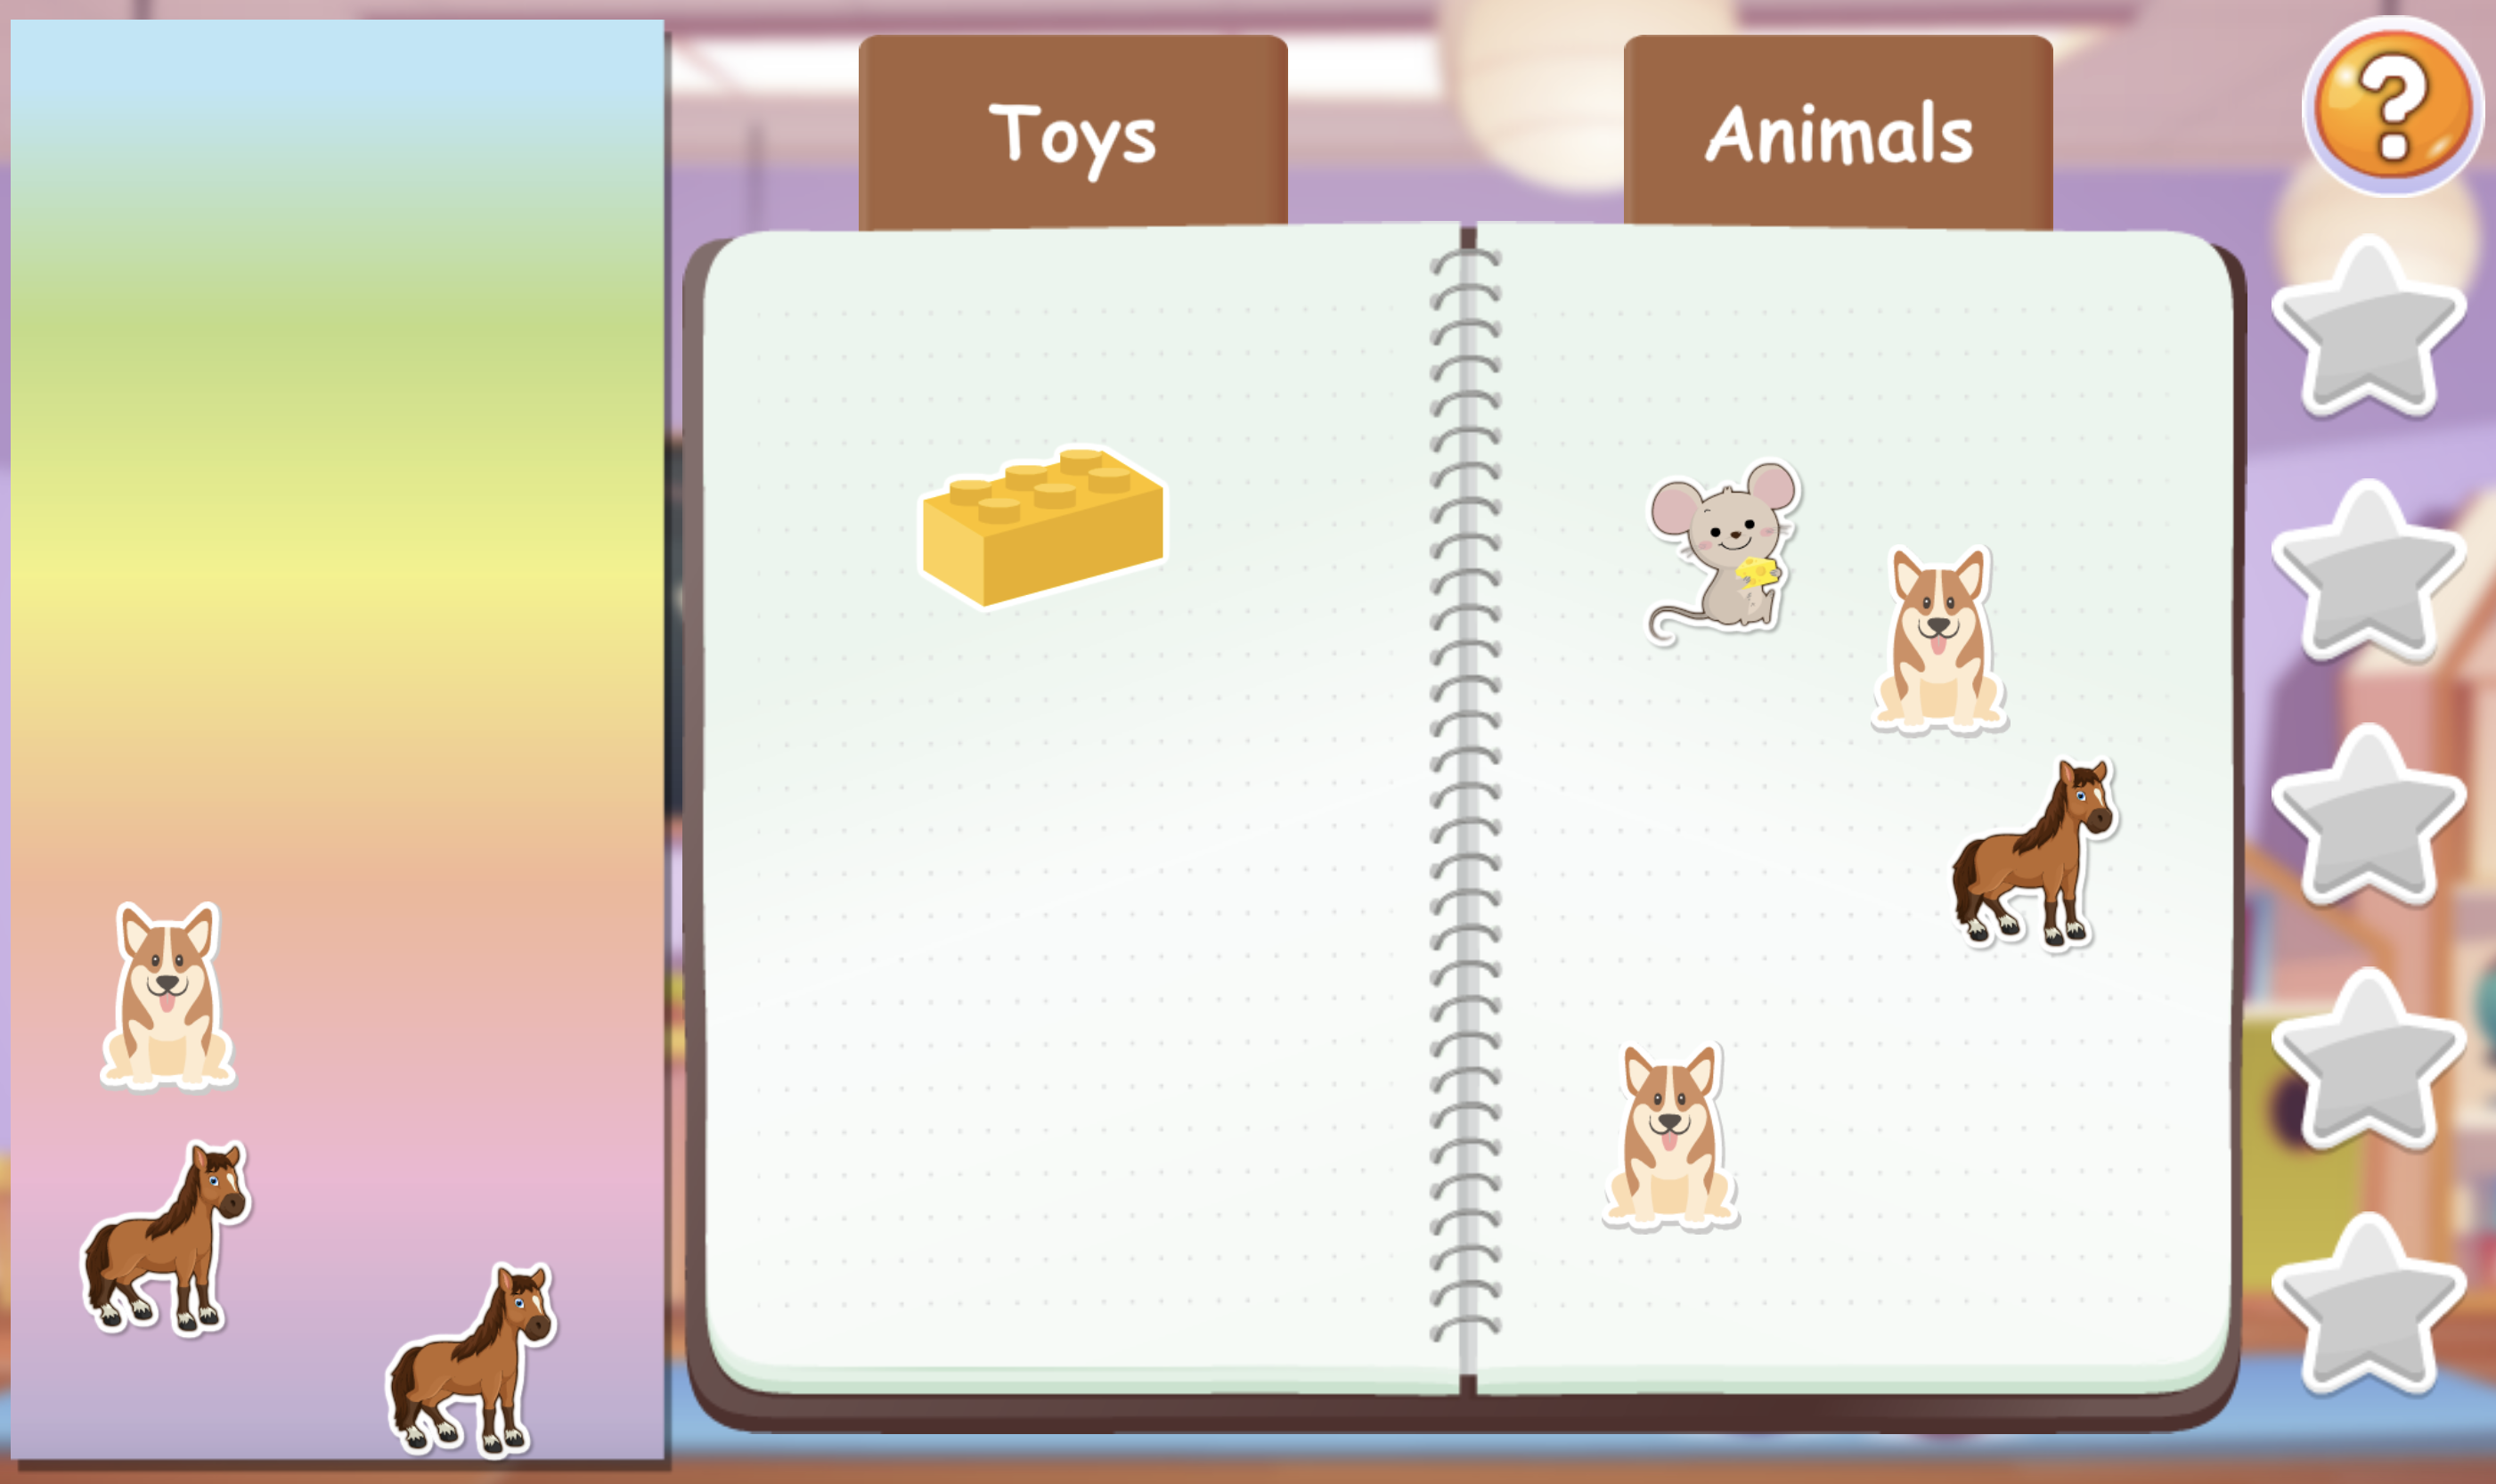 Place the stickers on the page, sorting them by toy or animal